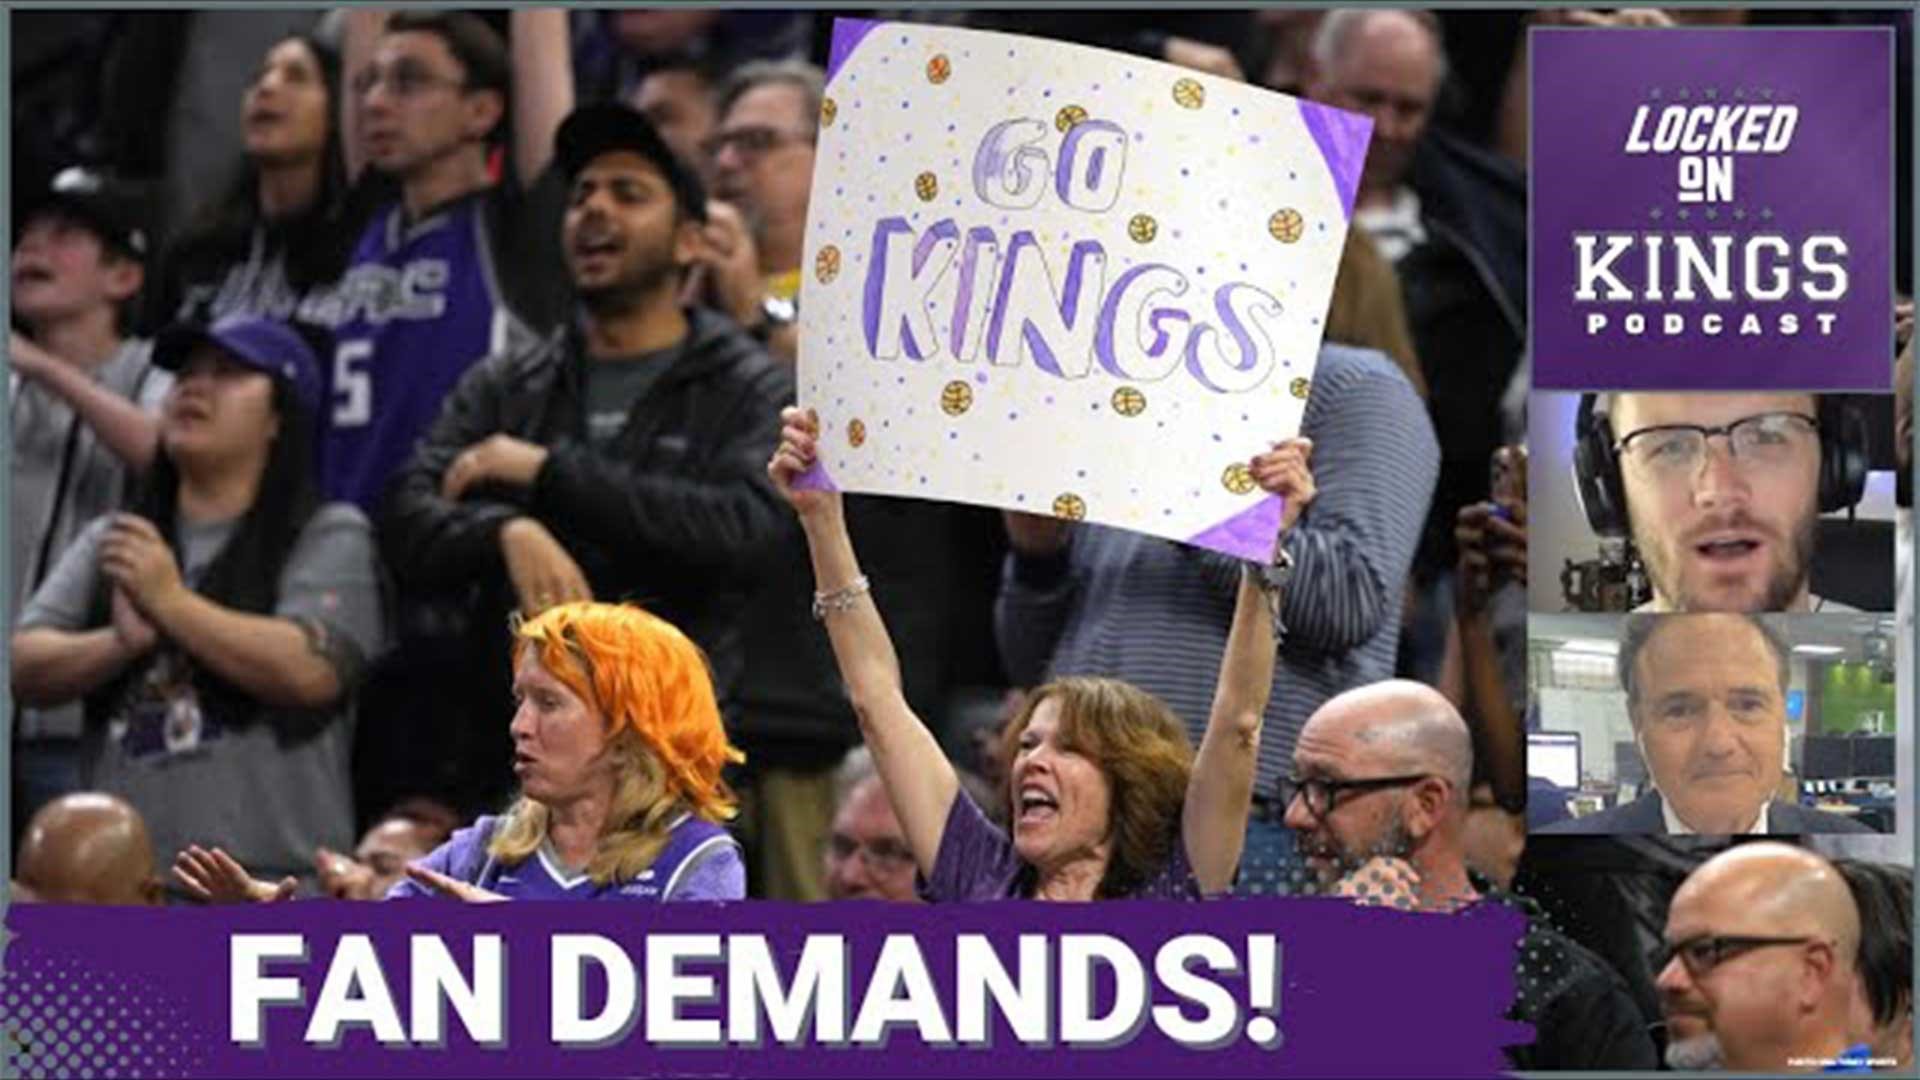 Matt George is joined by ABC 10's Walt Gray to discuss the patience of Sacramento Kings fans and their high expectations now that the playoff drought has ended.